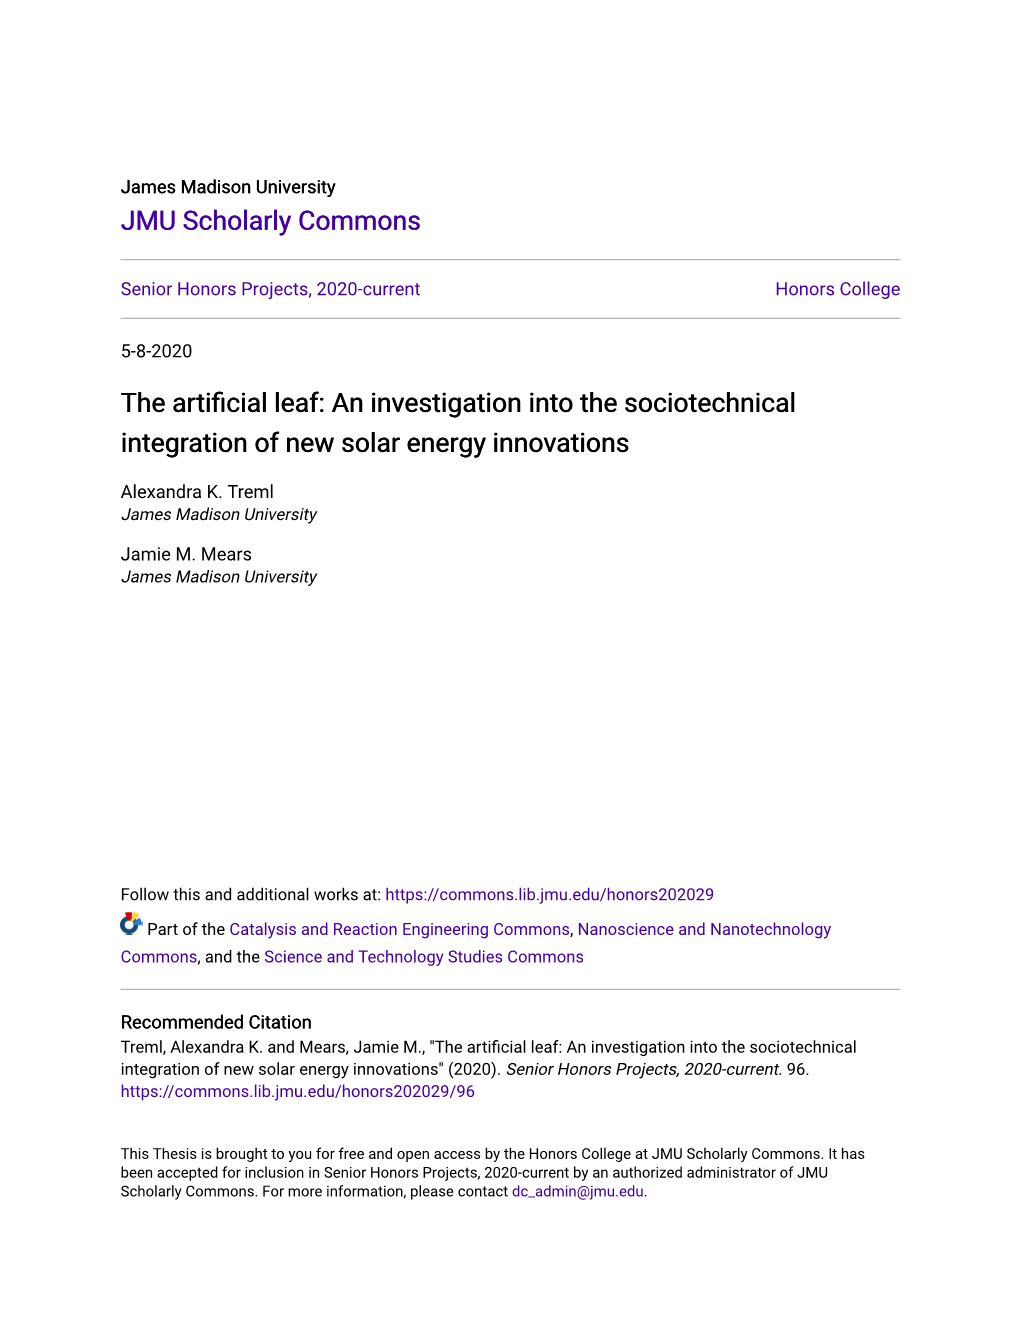 The Artificial Leaf: an Investigation Into the Sociotechnical Integration of New Solar Energy Innovations